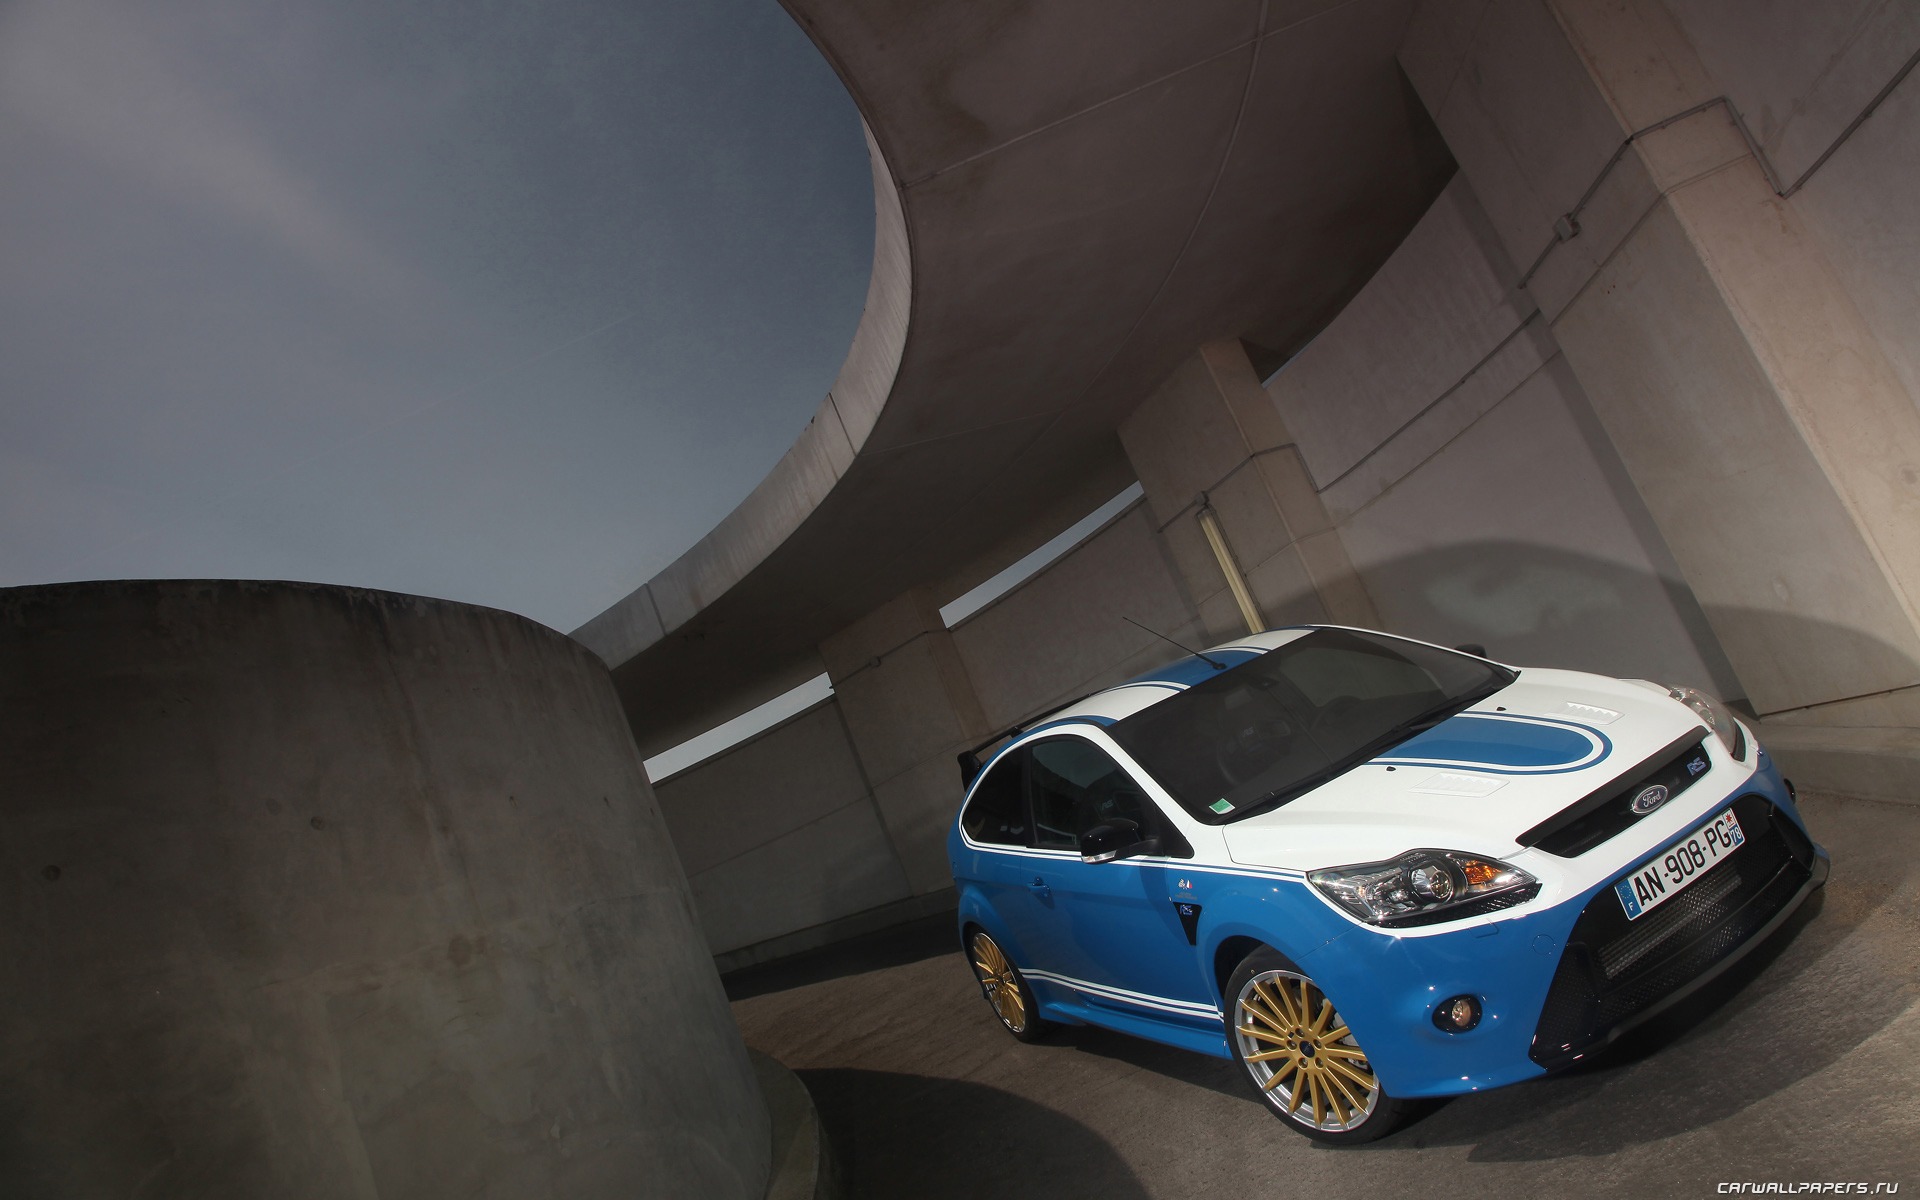 Ford Focus RS Le Mans Classic - 2010 福特4 - 1920x1200